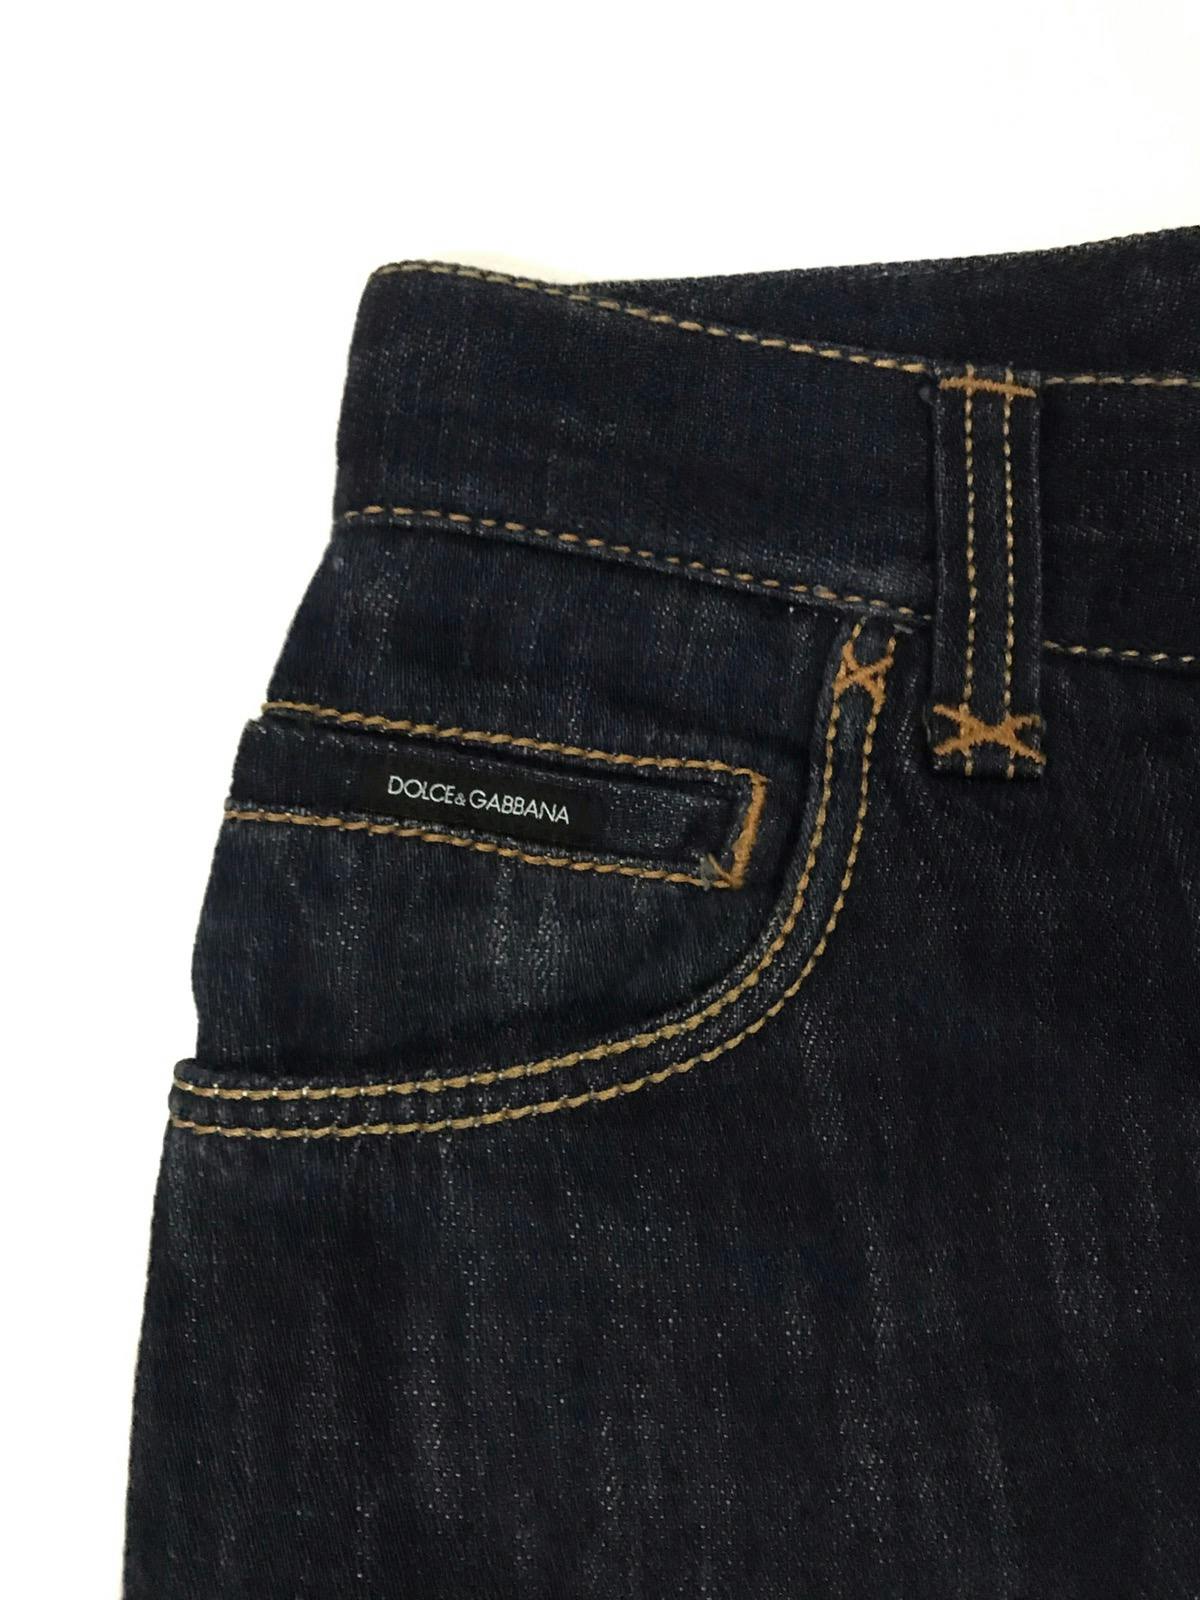 Dolce & Gabanna D&G 17 Loose Denim Jeans Made in Italy 🇮🇹 - 3